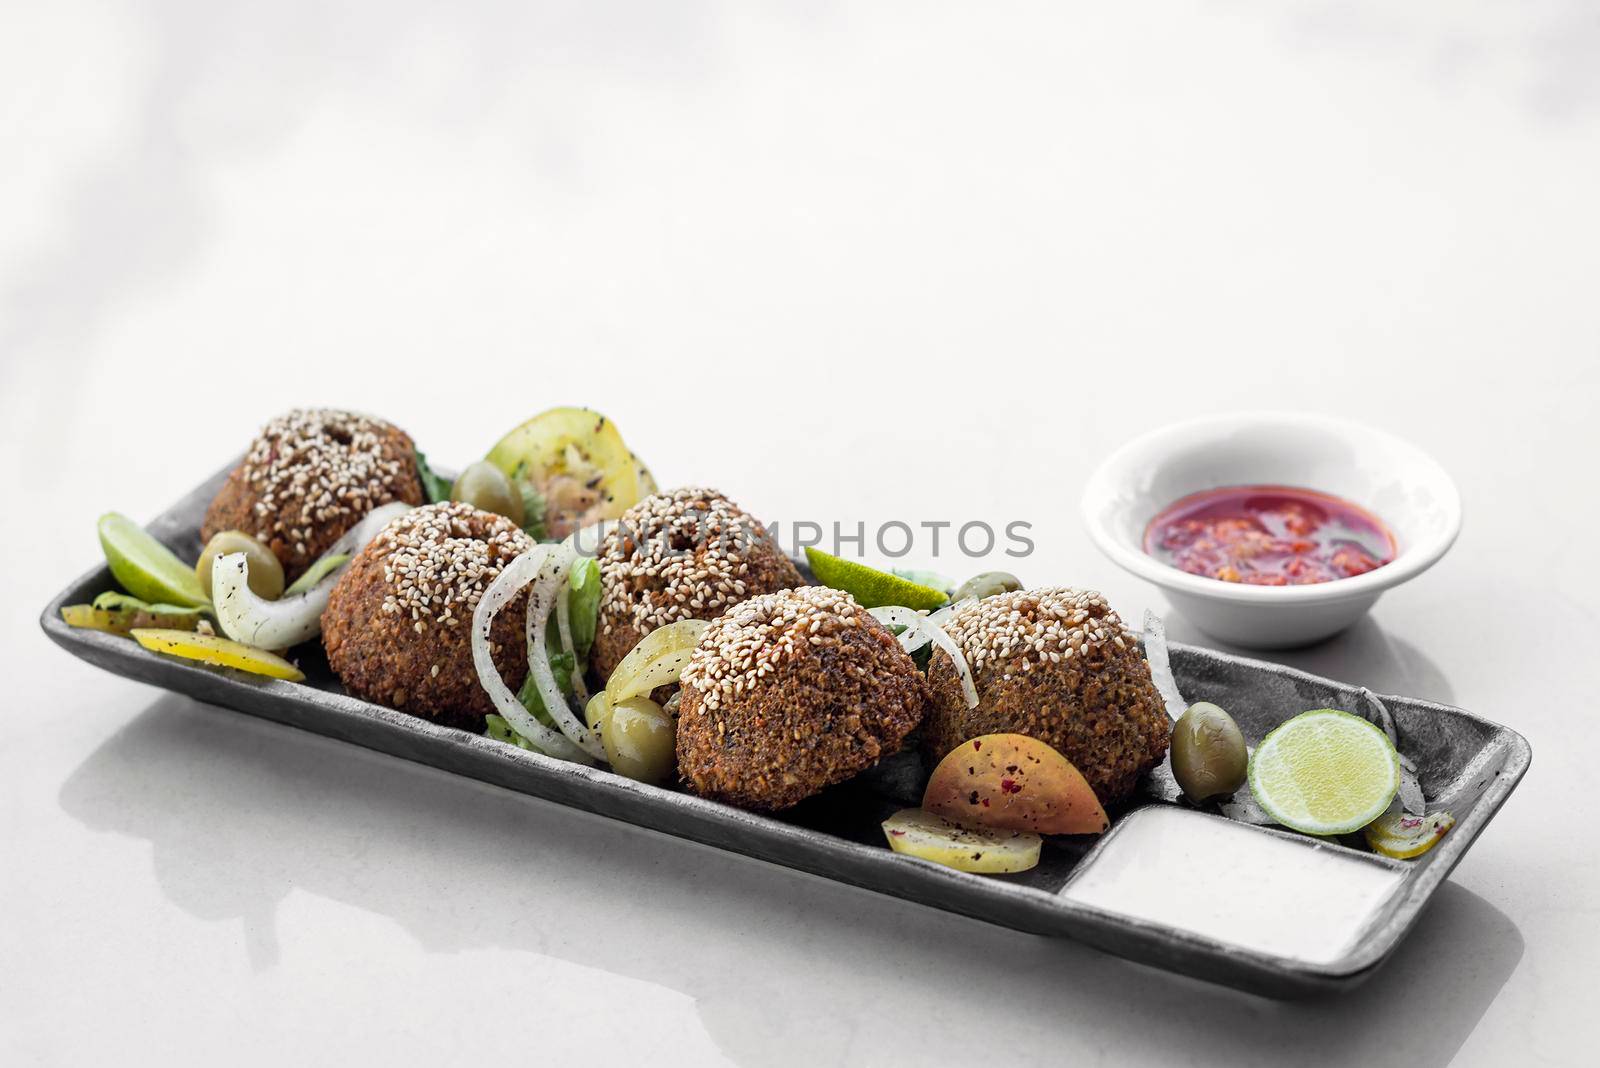 lebanese falafel plate with pickles salad and sauces by jackmalipan